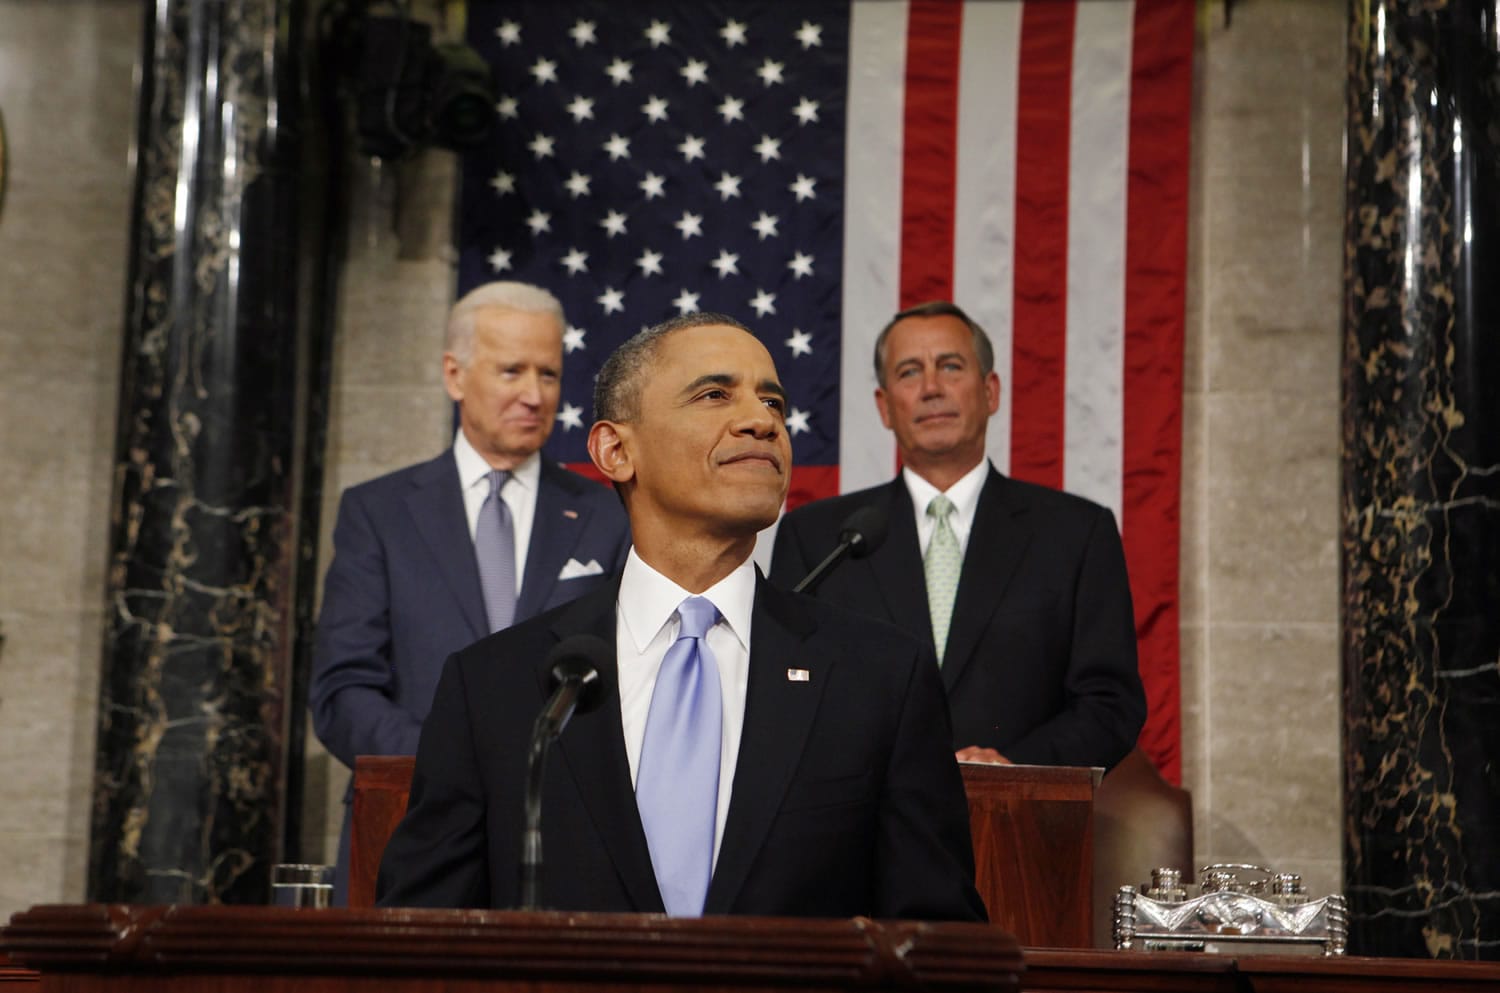 President Barack Obama smiles as he arrives to deliver the State of Union address before a joint session of Congress in the House chamber Tuesda in Washington, as Vice President Joe Biden, and House Speaker John Boehner of Ohio, watch.